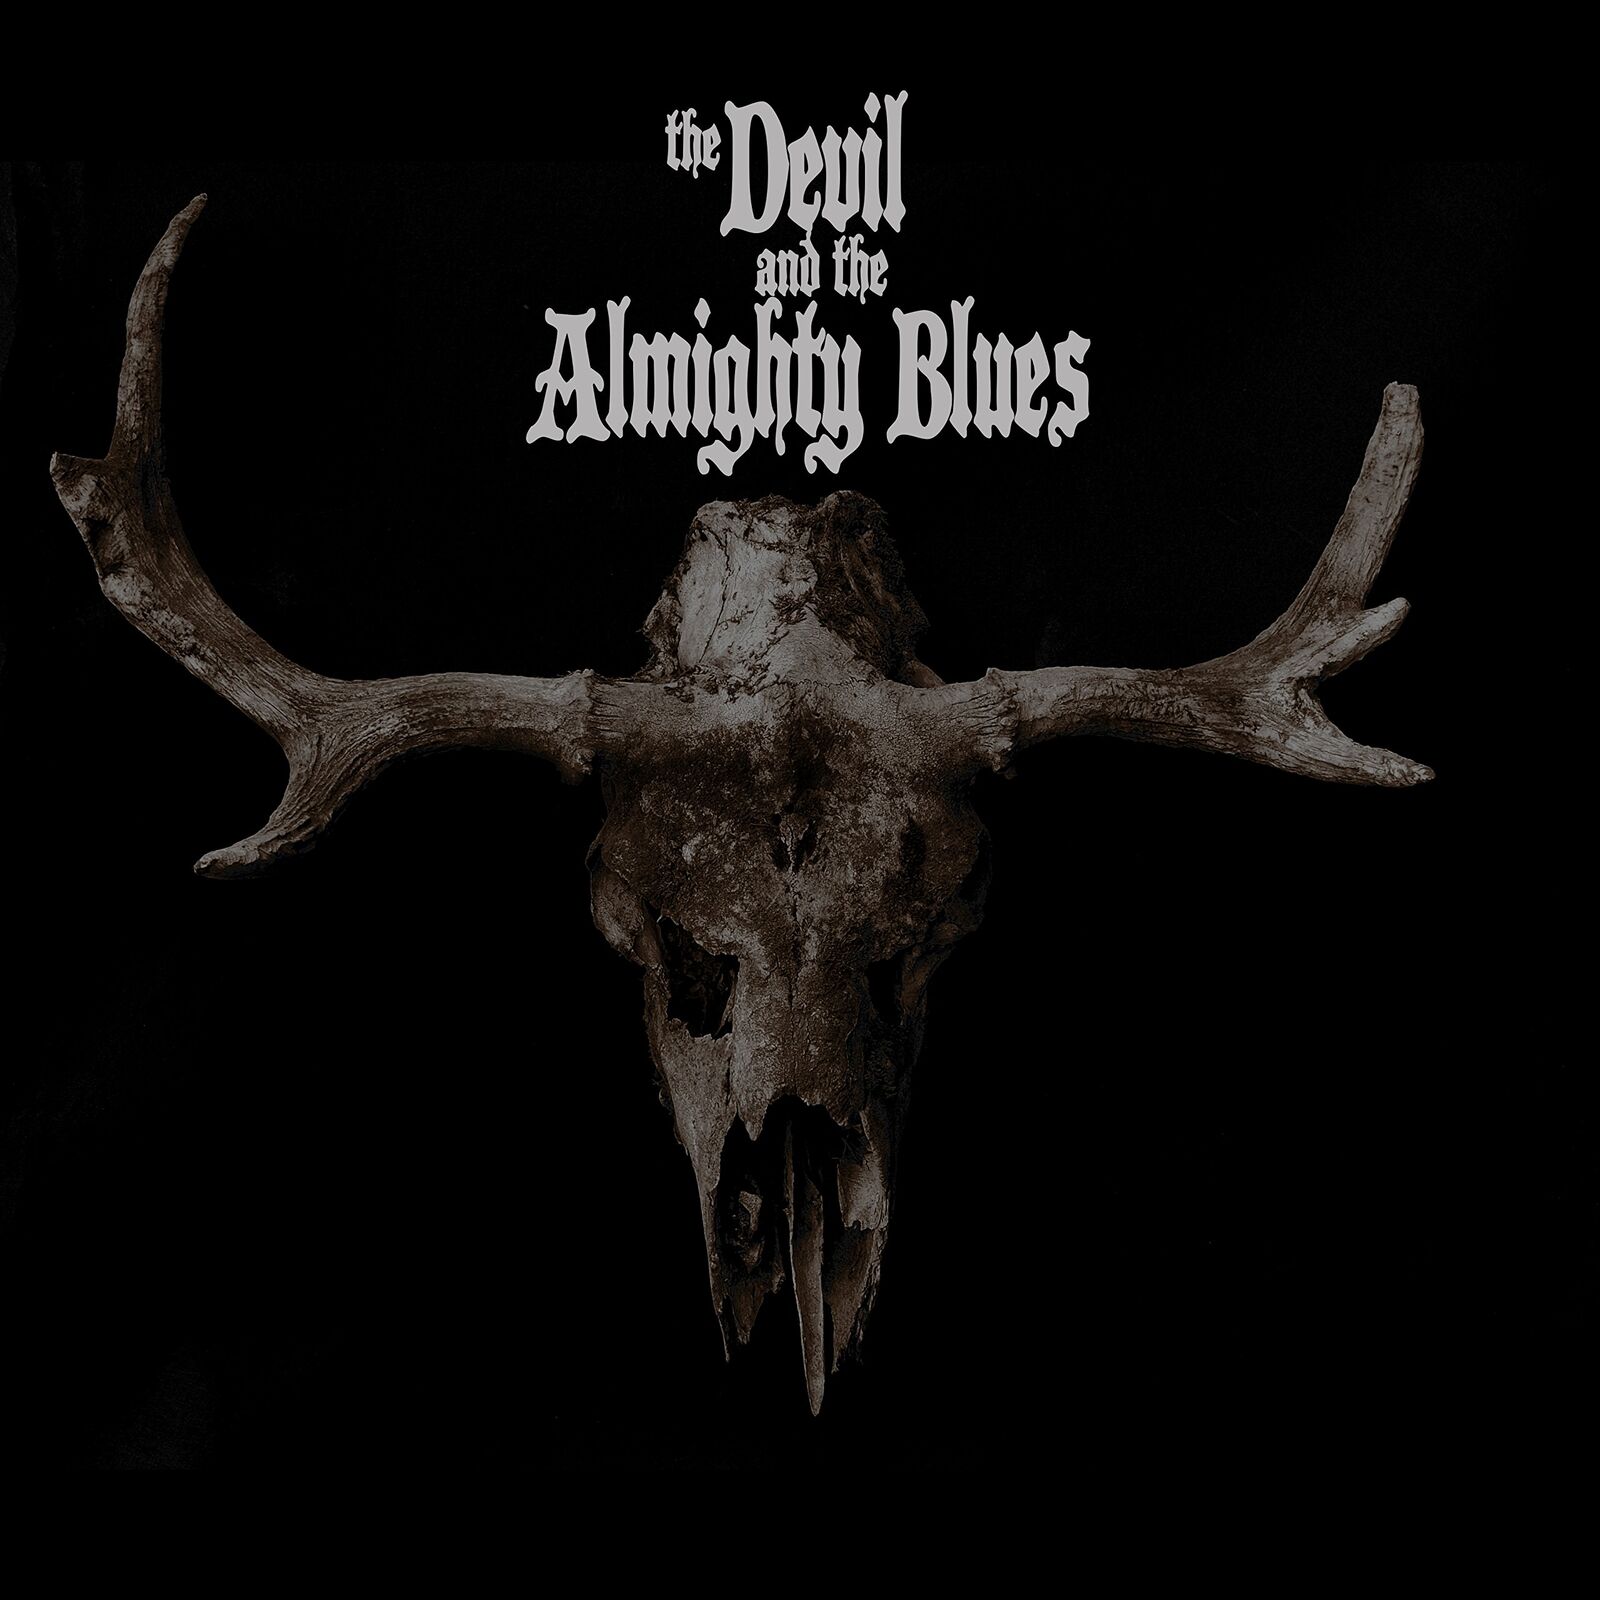 The Devil and the Almighty Blues Tdatab (Vinyl) (UK IMPORT)